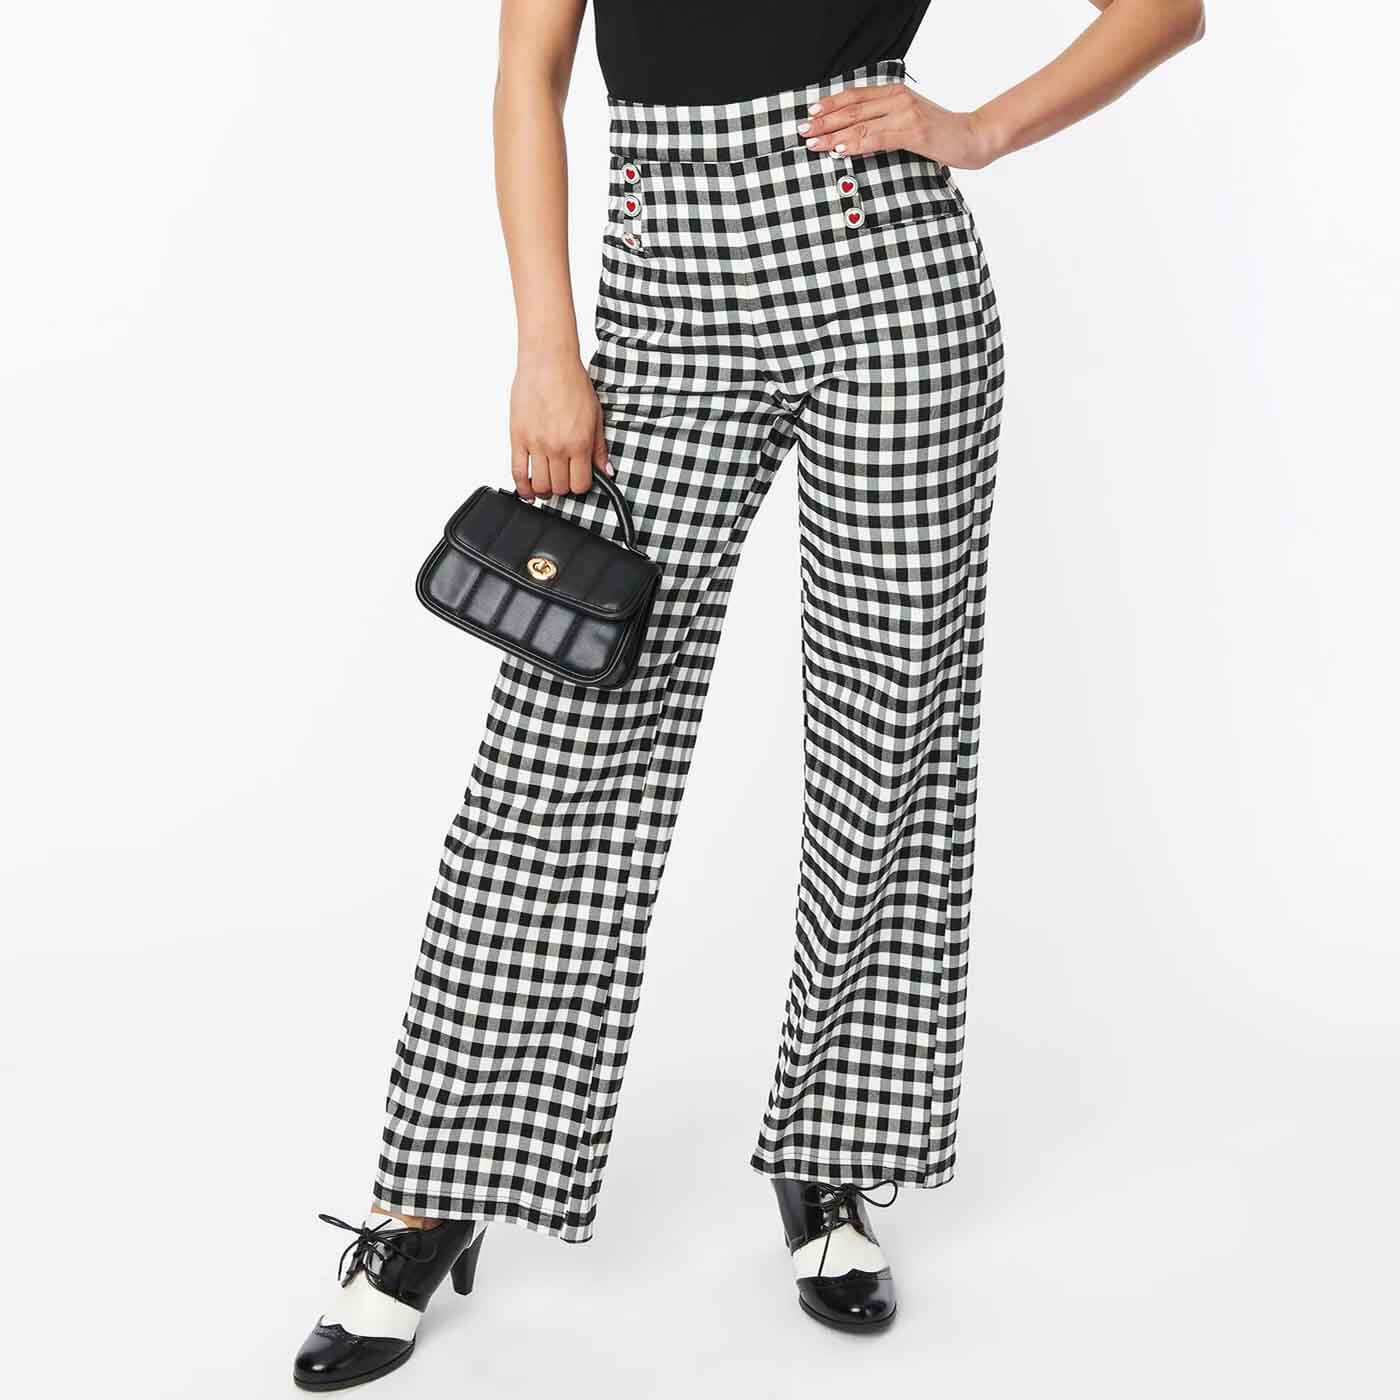 Retro Hight waisted gingham trousers by Unique Vintage brand